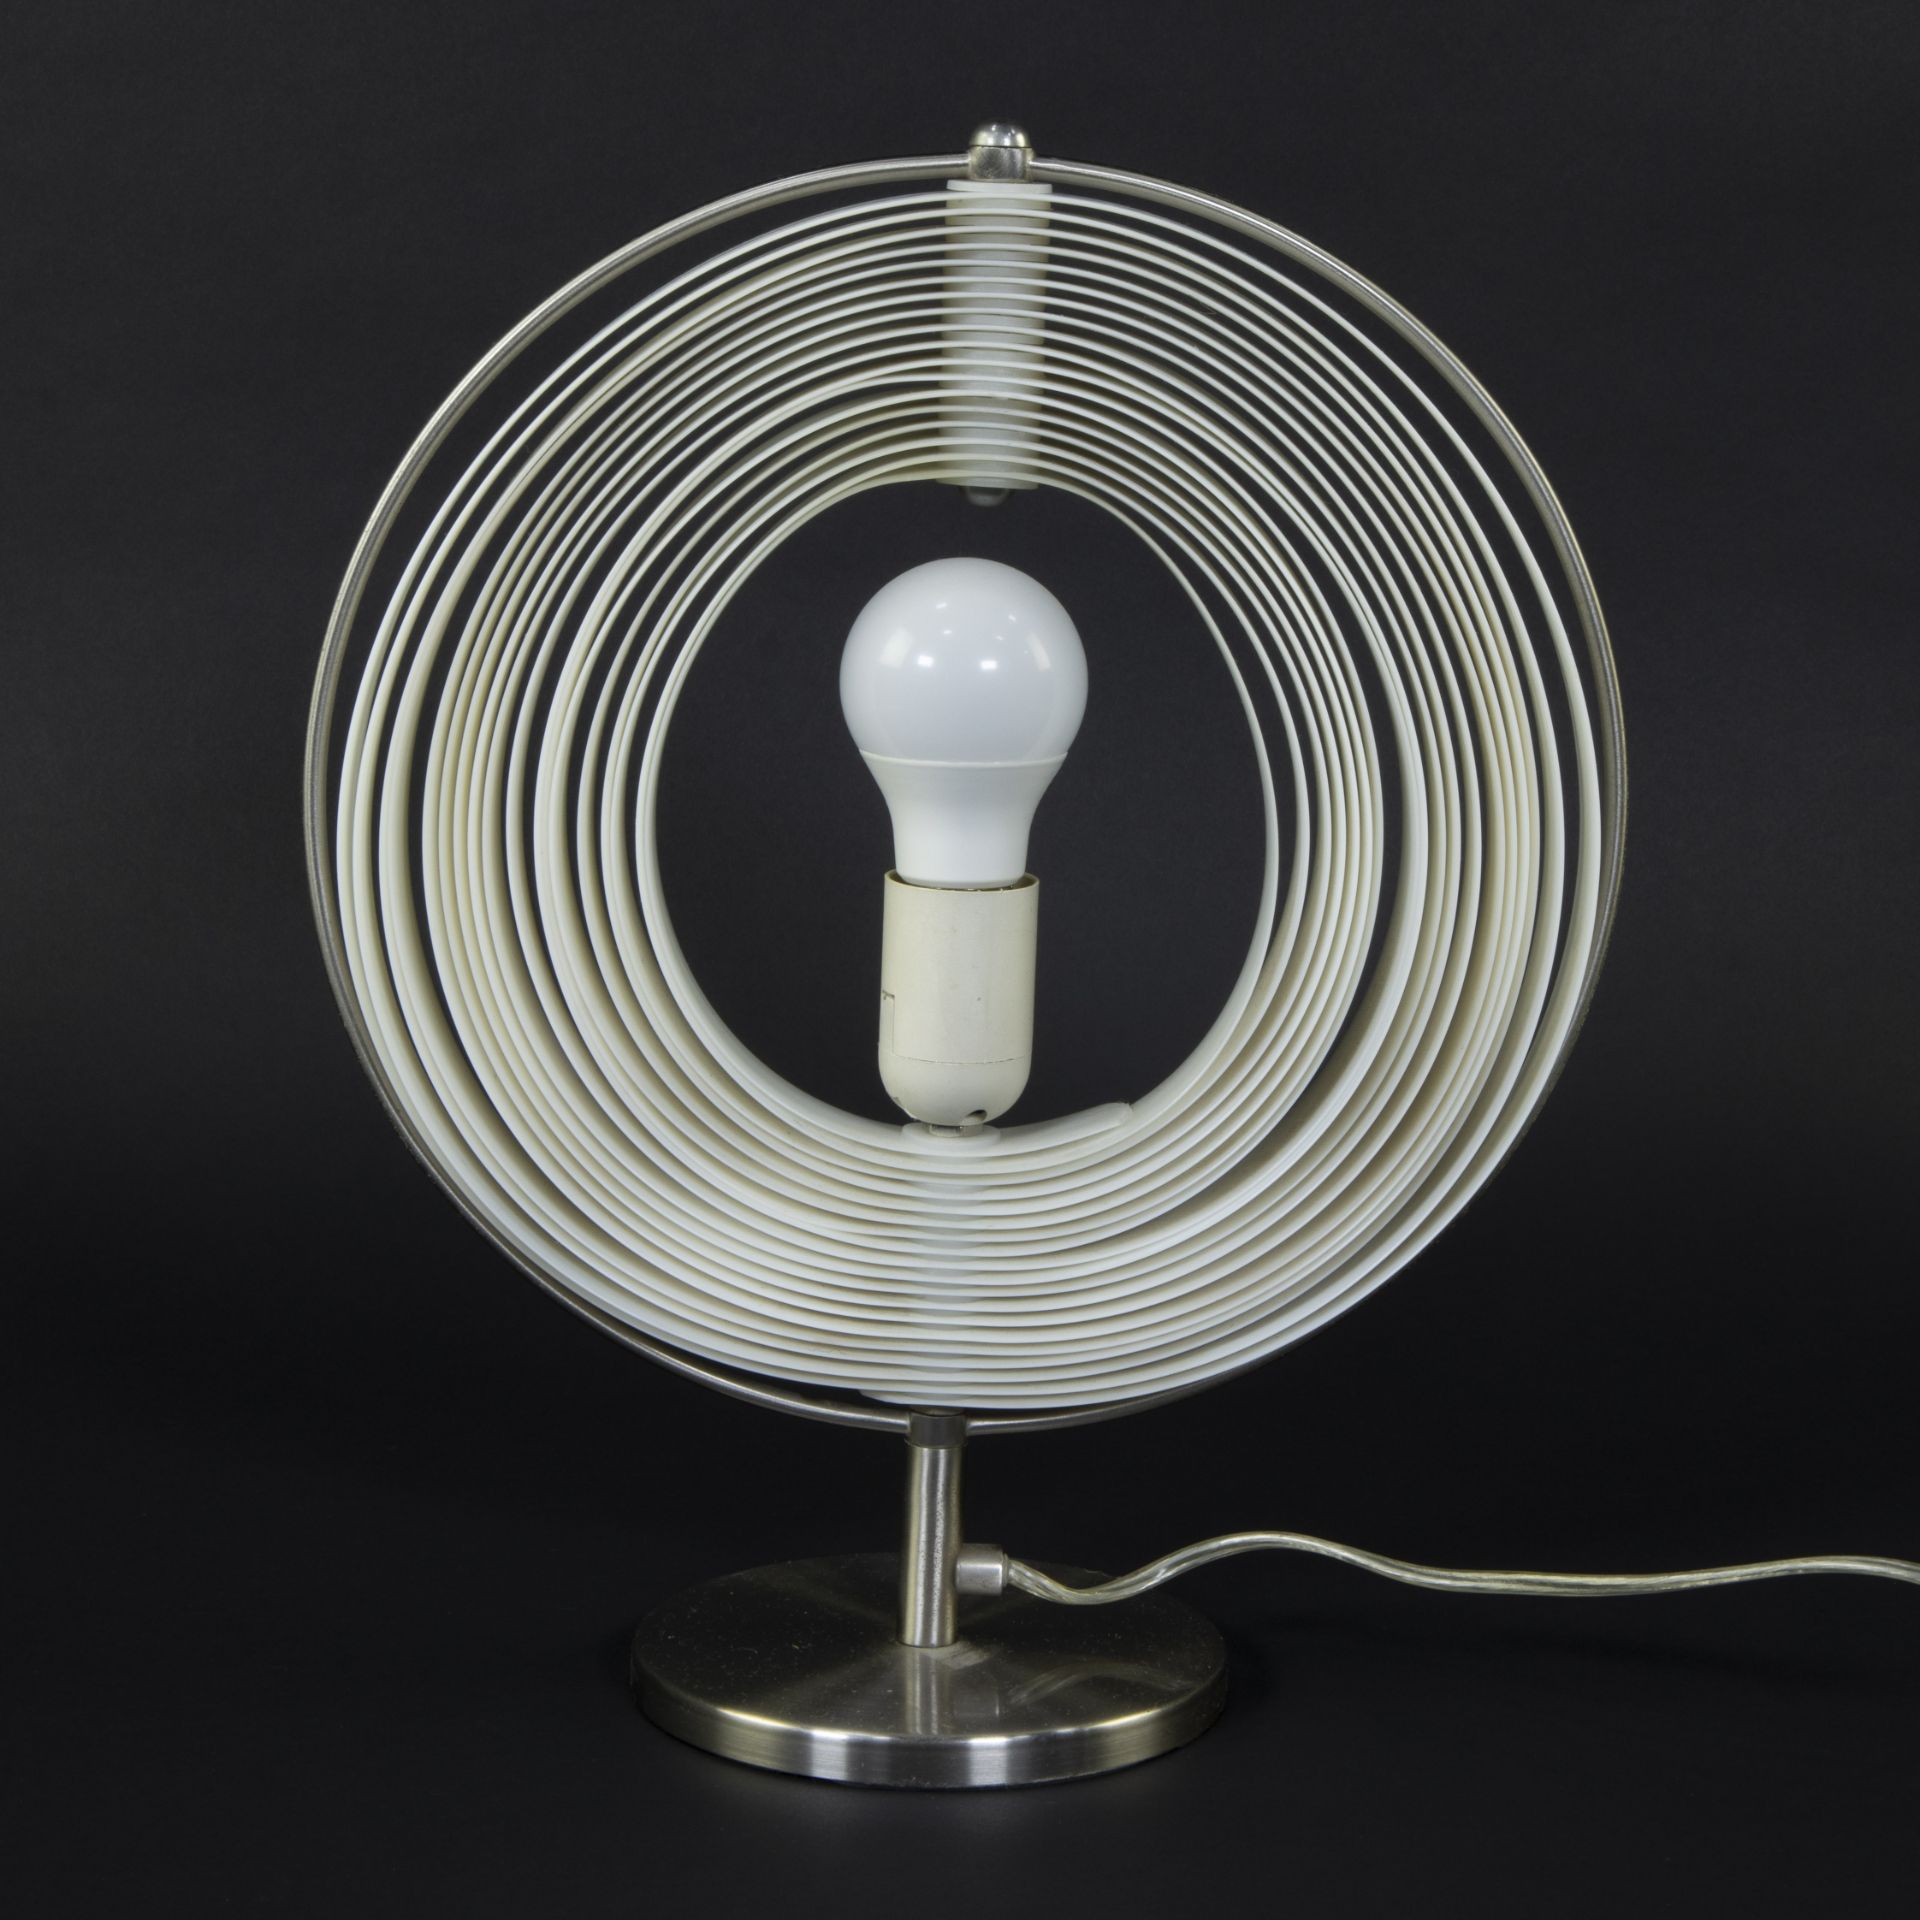 Rare Moon lamp designed and produced by KARE design in the 1980s with 31 cm spiral plastic adjustabl - Bild 2 aus 3